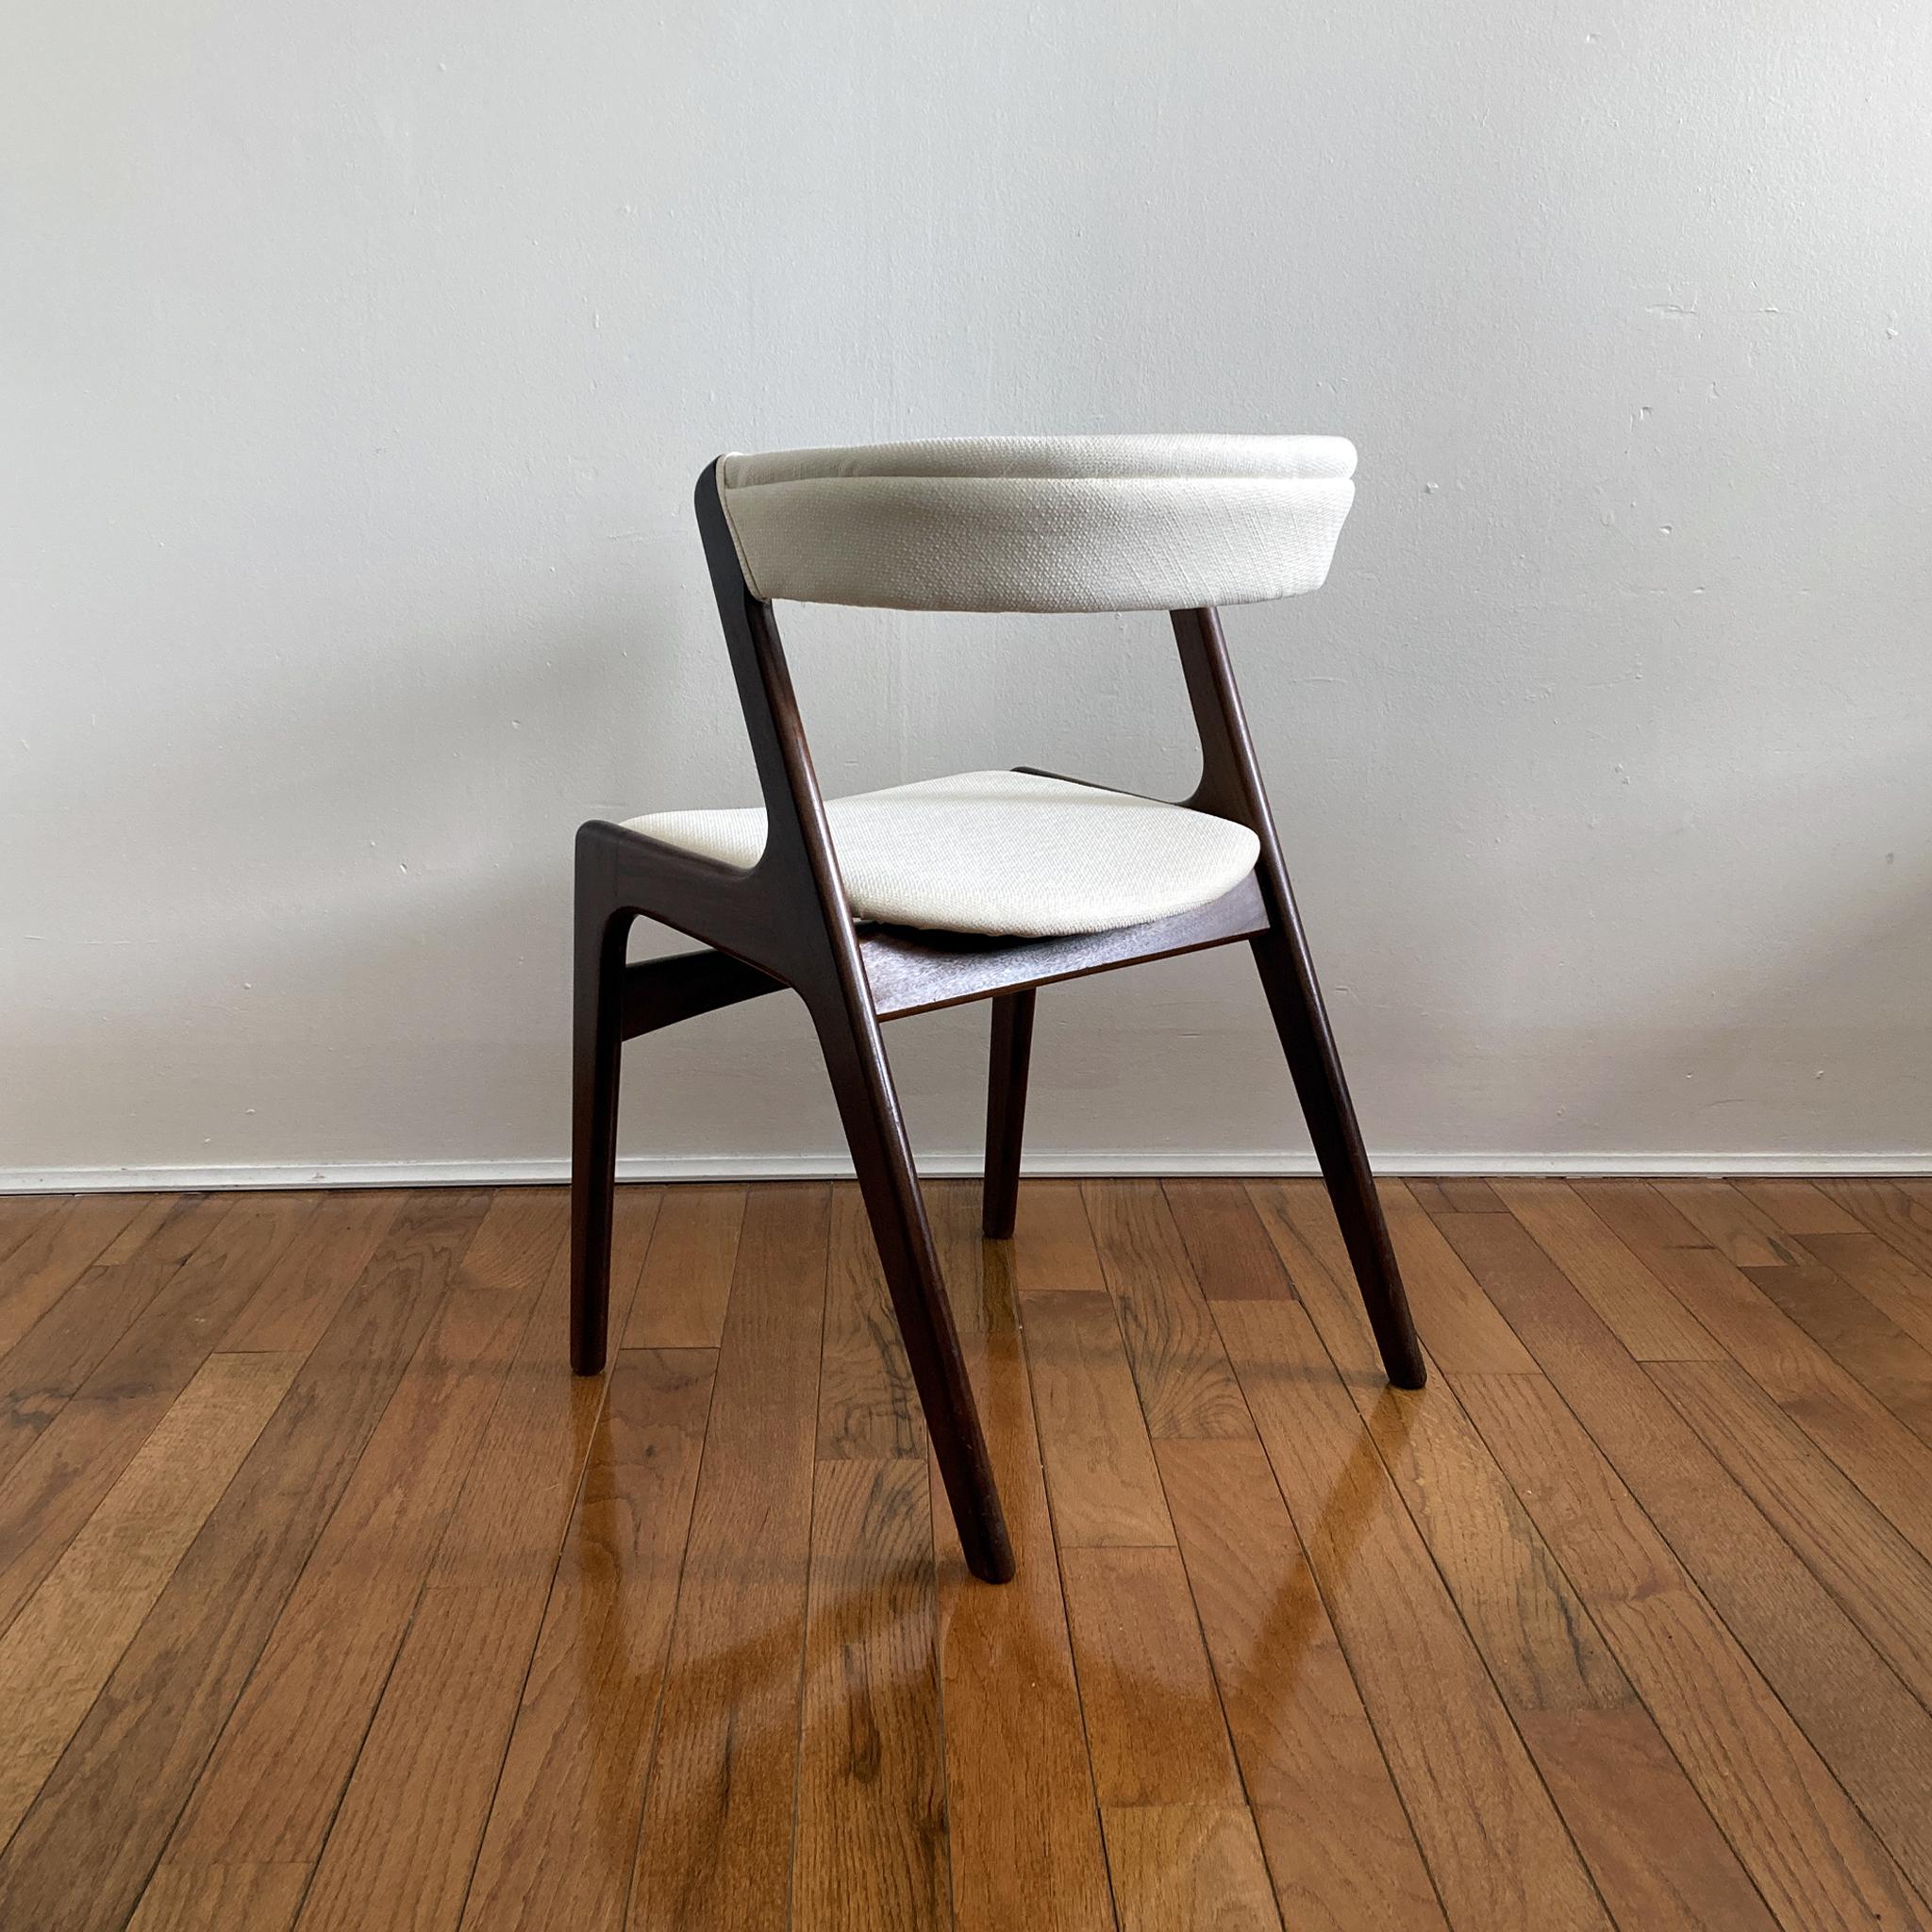 Kai Kristiansen Ivory Tweed Curved Back Teak Chairs, Danish, 1960s, Pair of Two For Sale 2